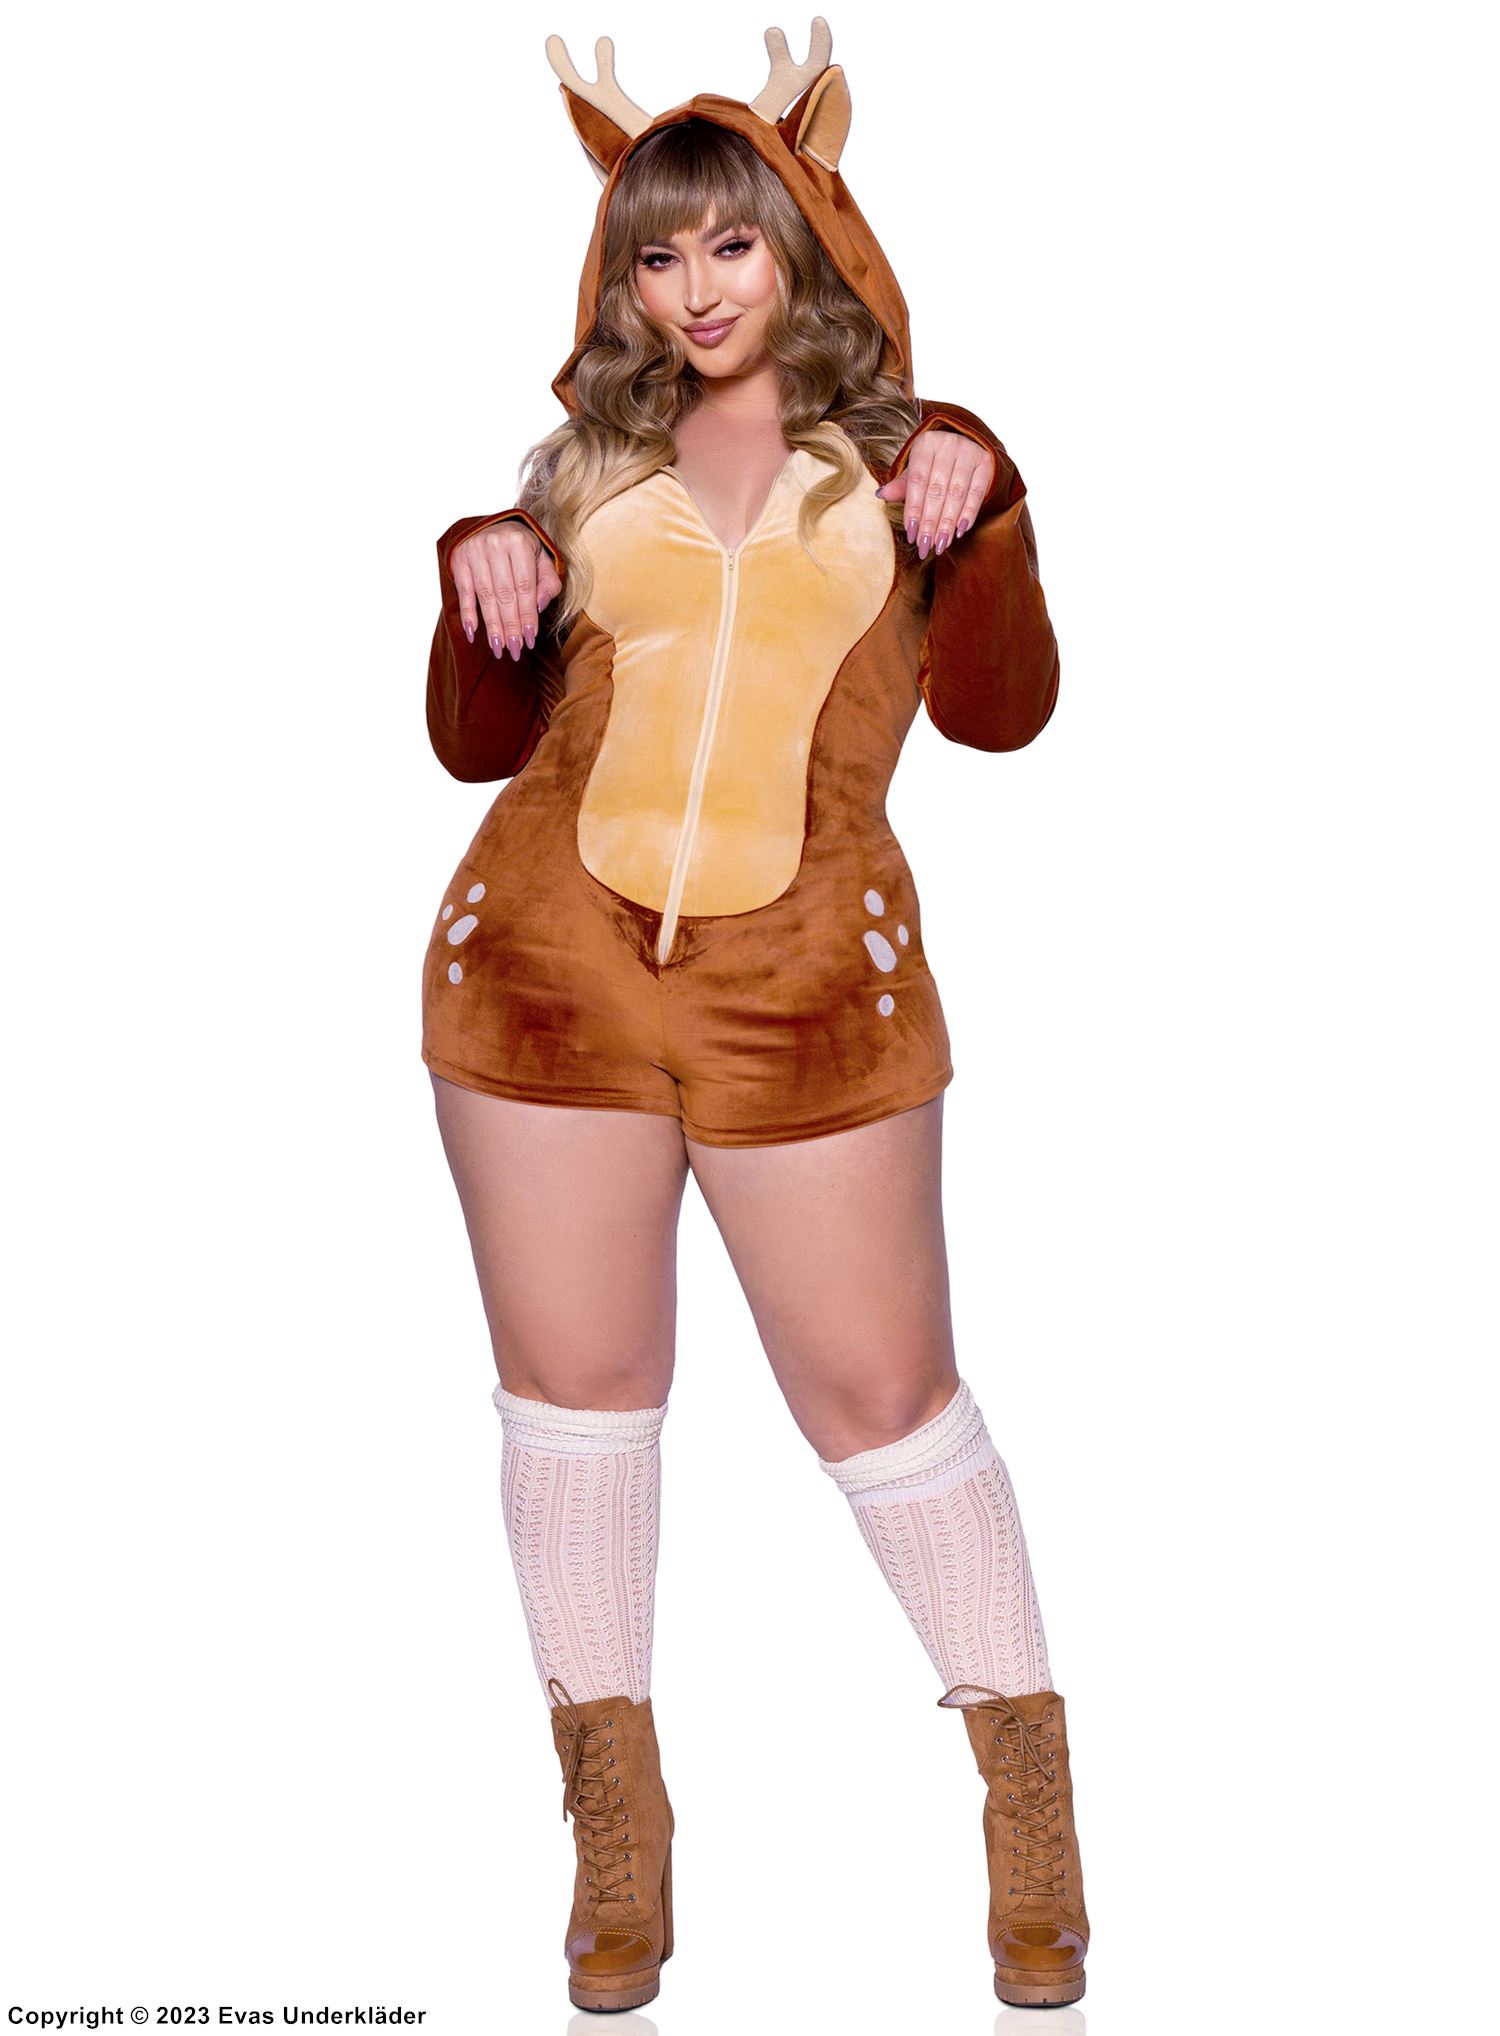 Fawn, costume romper, long sleeves, front zipper, tail, small dots, plus size